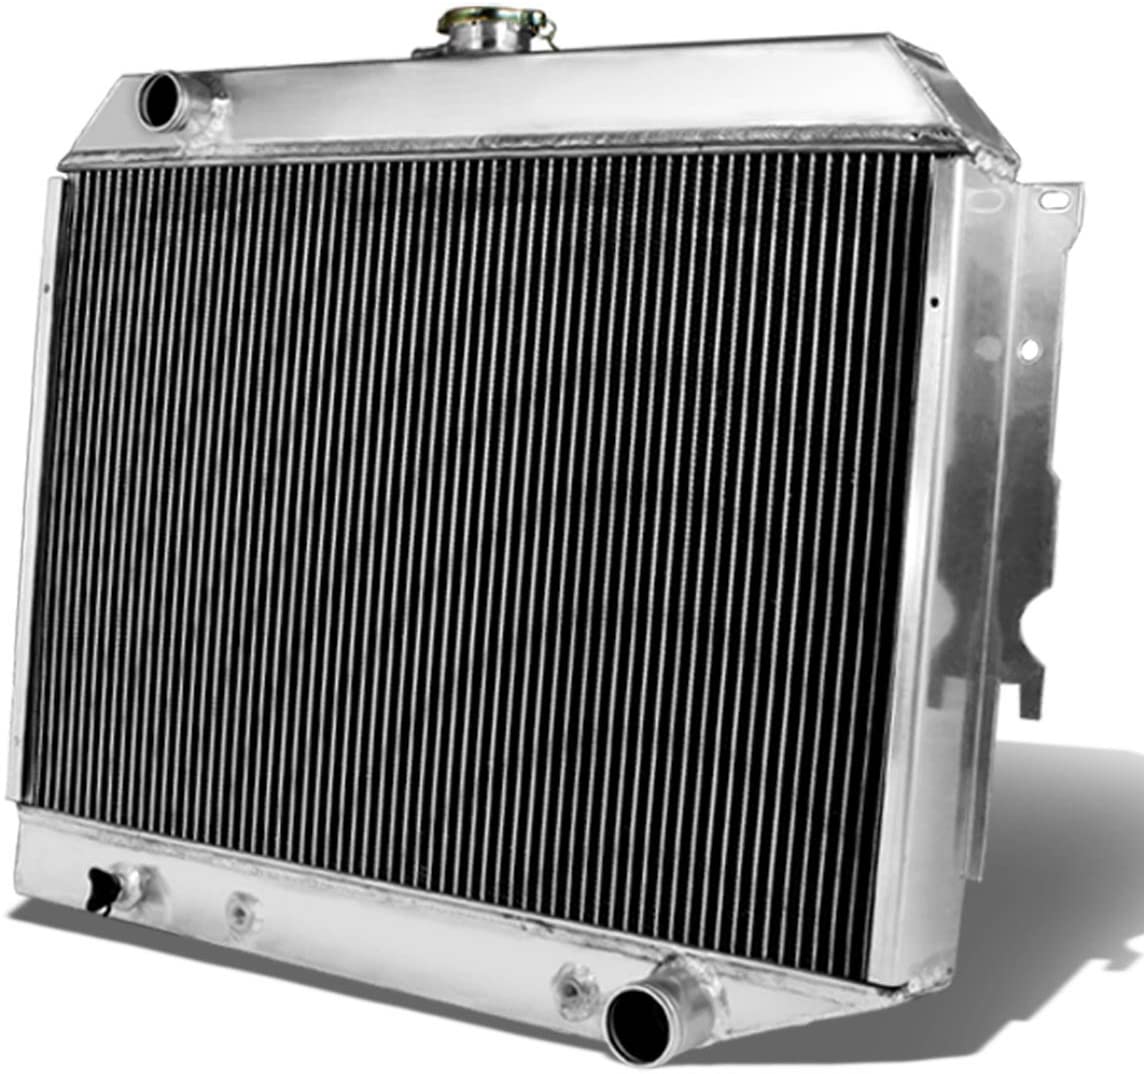 Full Aluminum 3-Row Racing Radiator Replacement for Dodge Charger Challenger Coronet 68-73